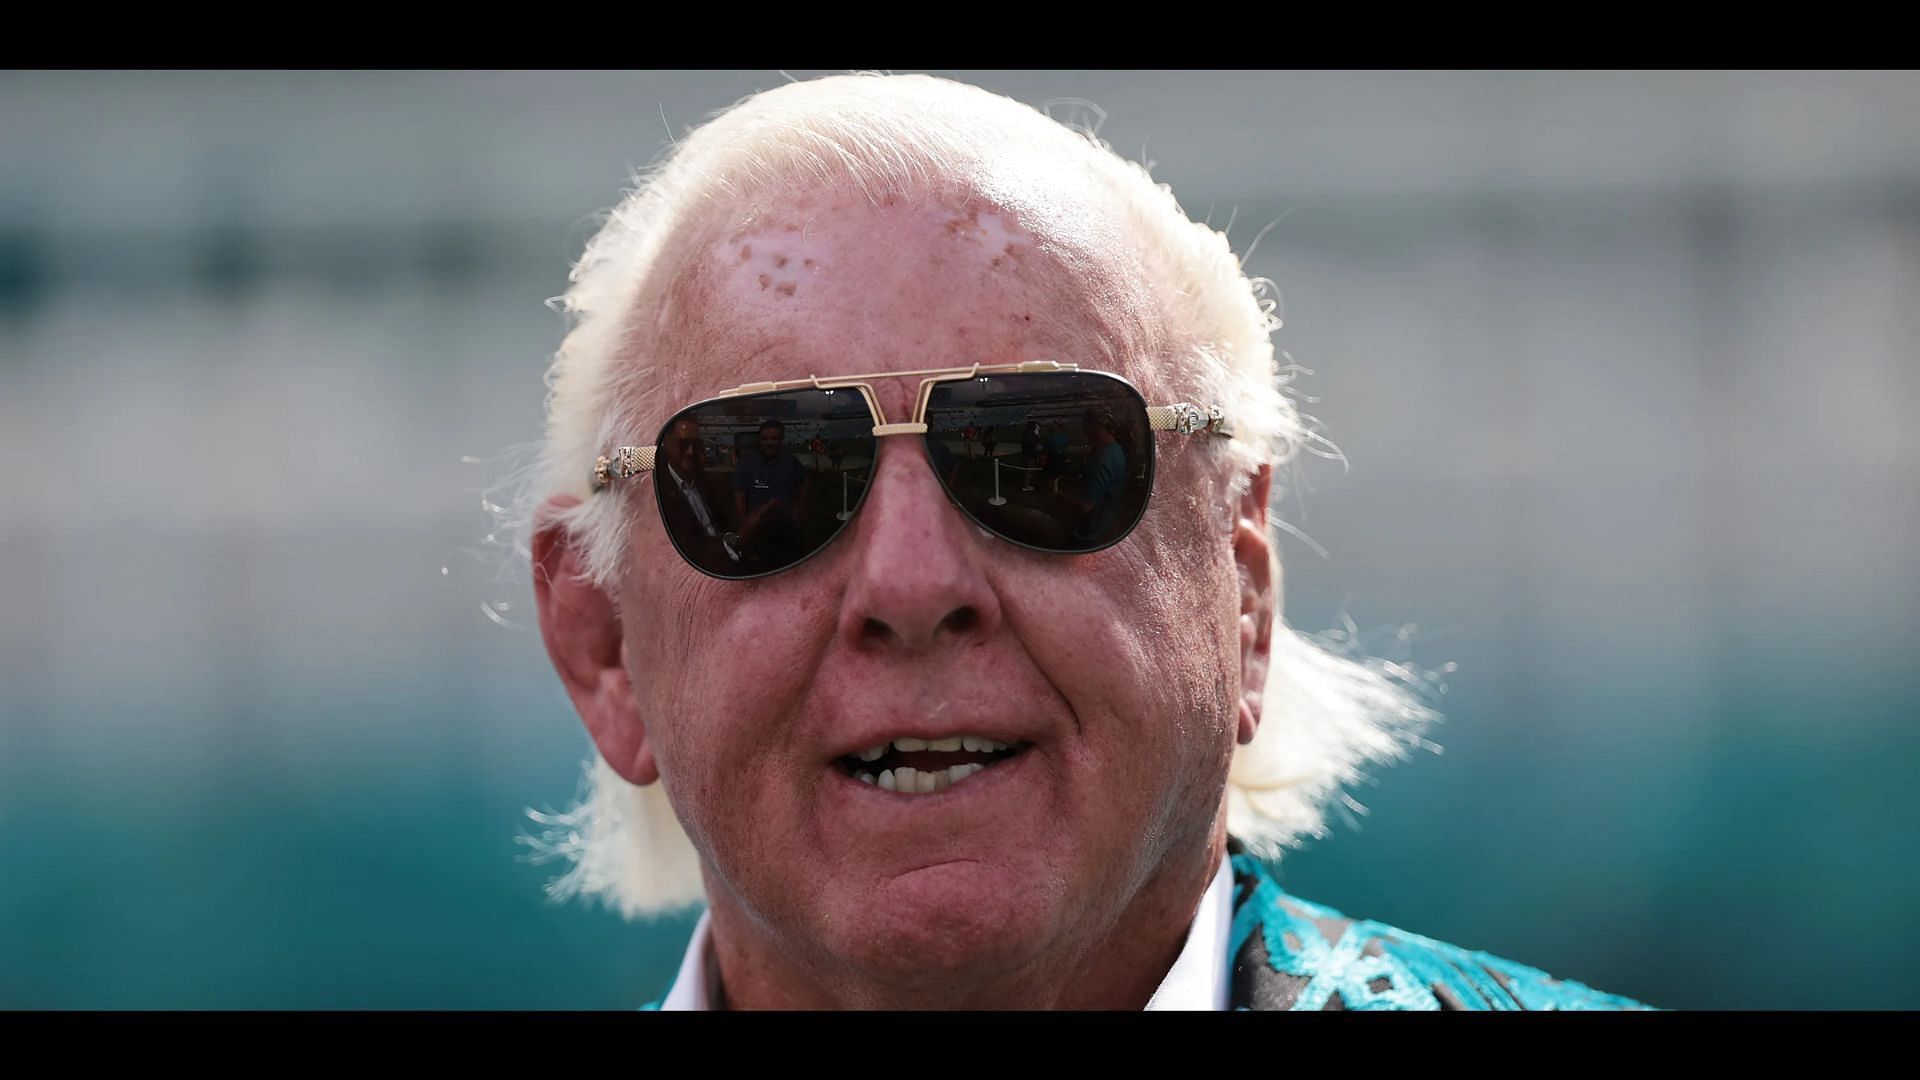 Ric Flair was recently called out for false claims by former WWE personality